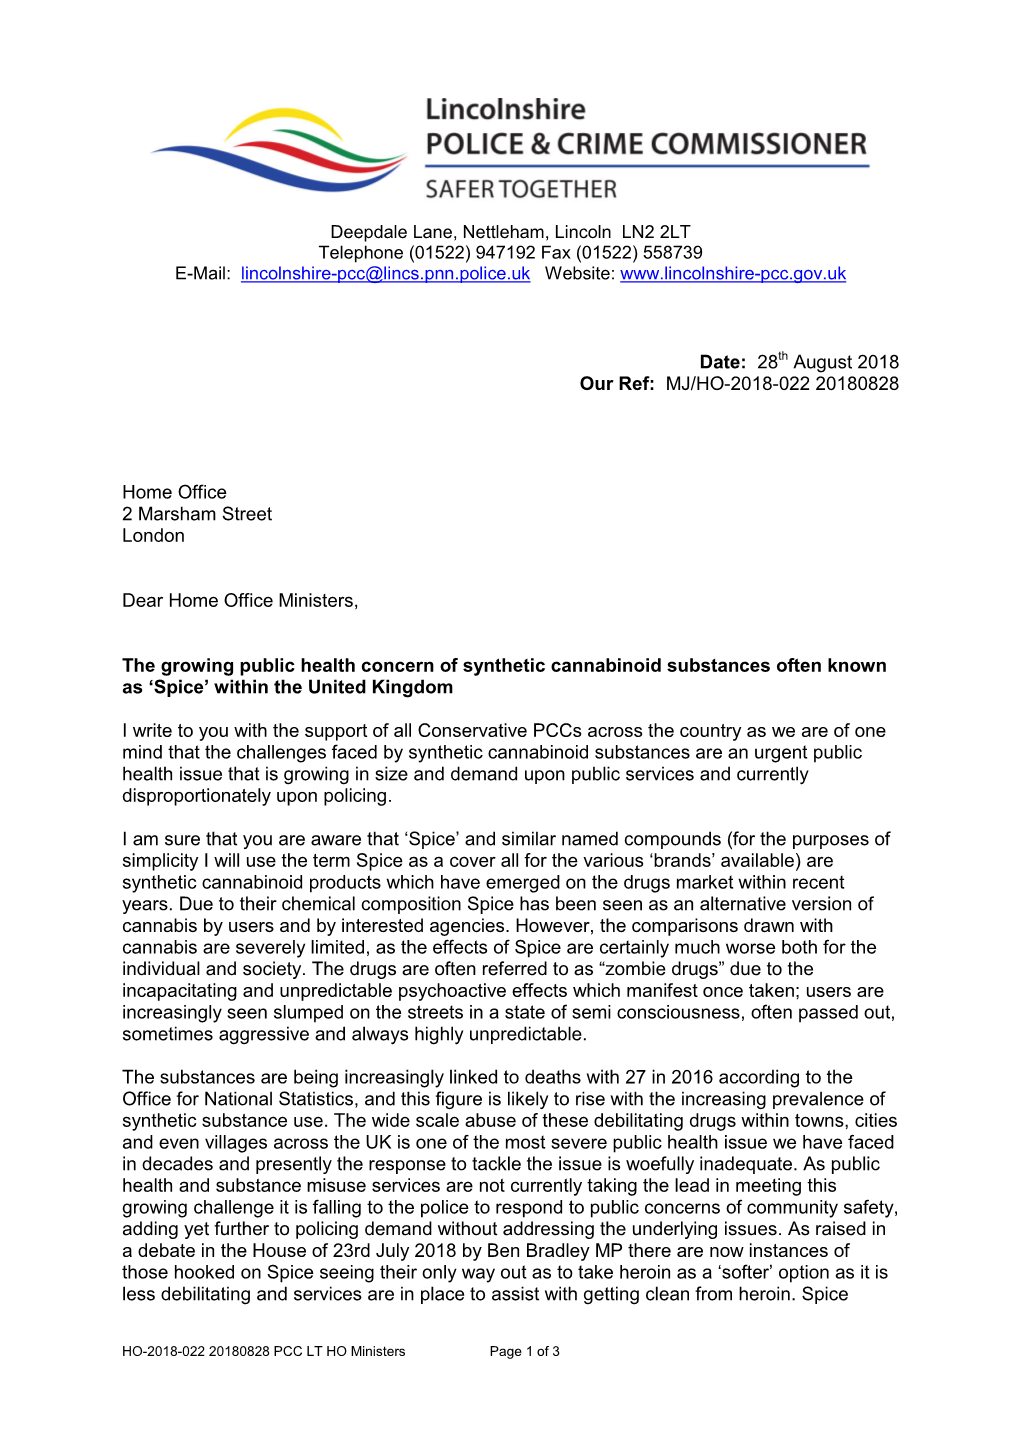 PCC's Letter to Home Office Ministers.Pdf 107.0KB